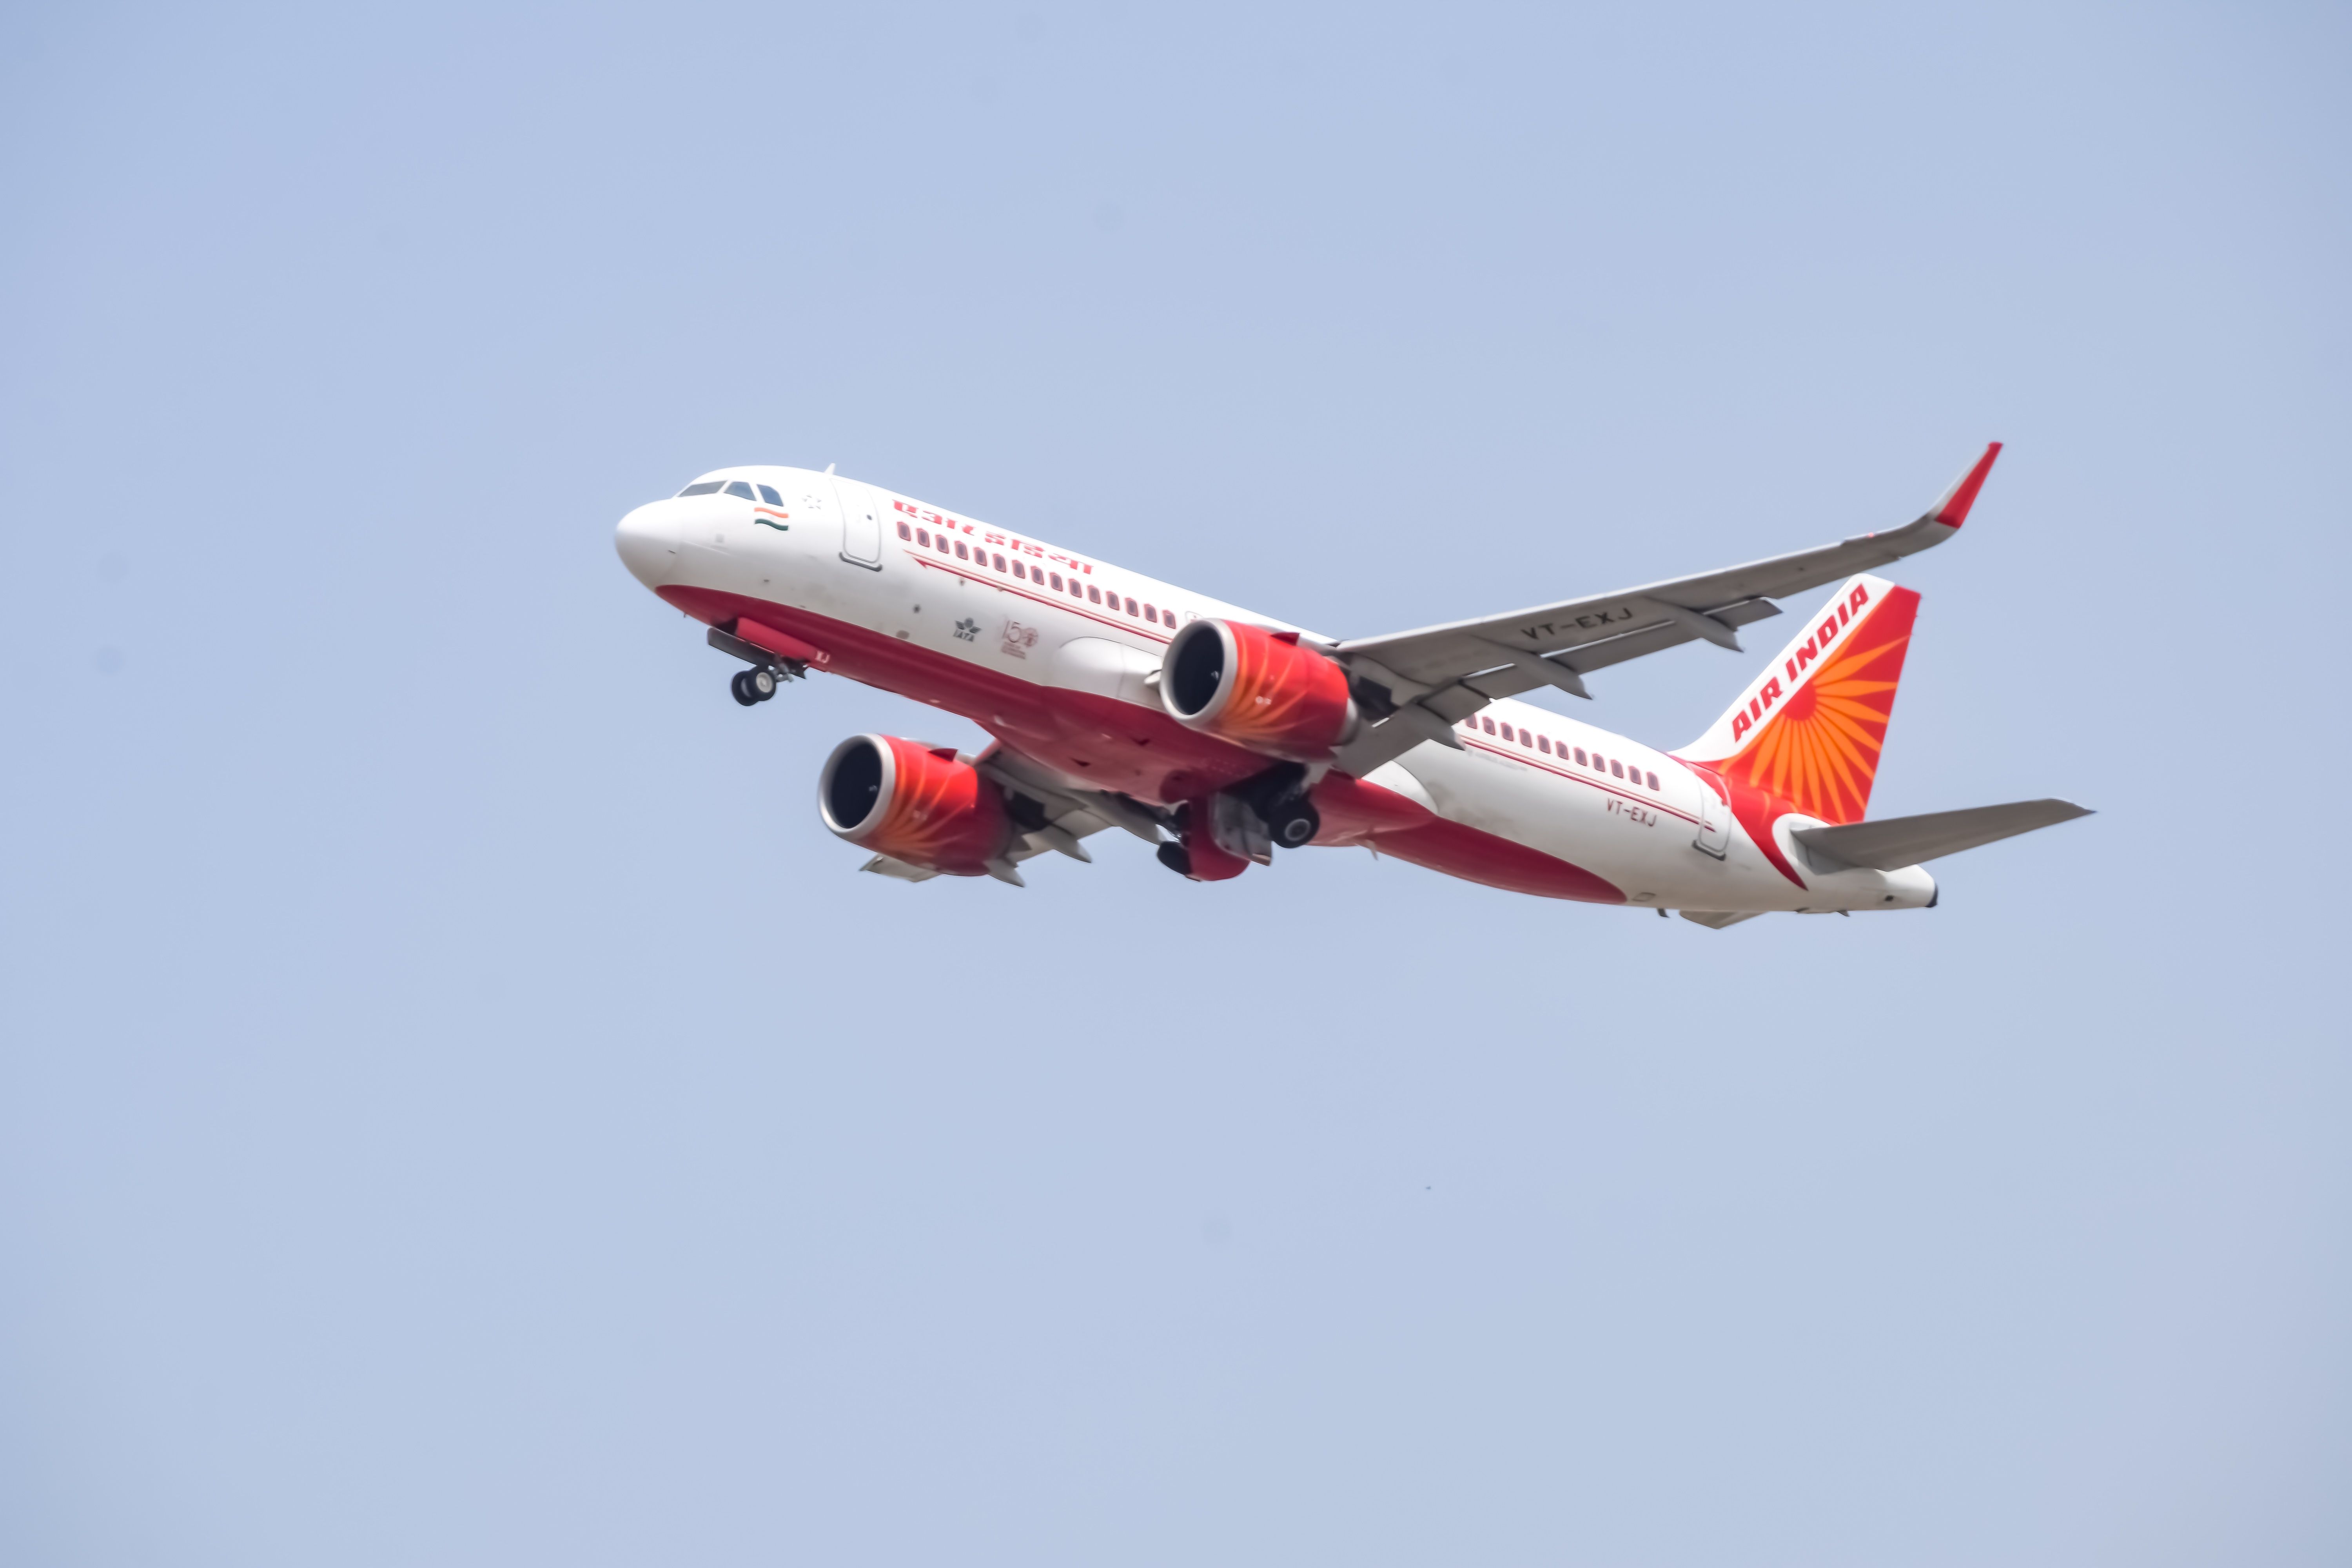 Air India Airbus A320 take off from Indra Gandhi International Airport Delhi